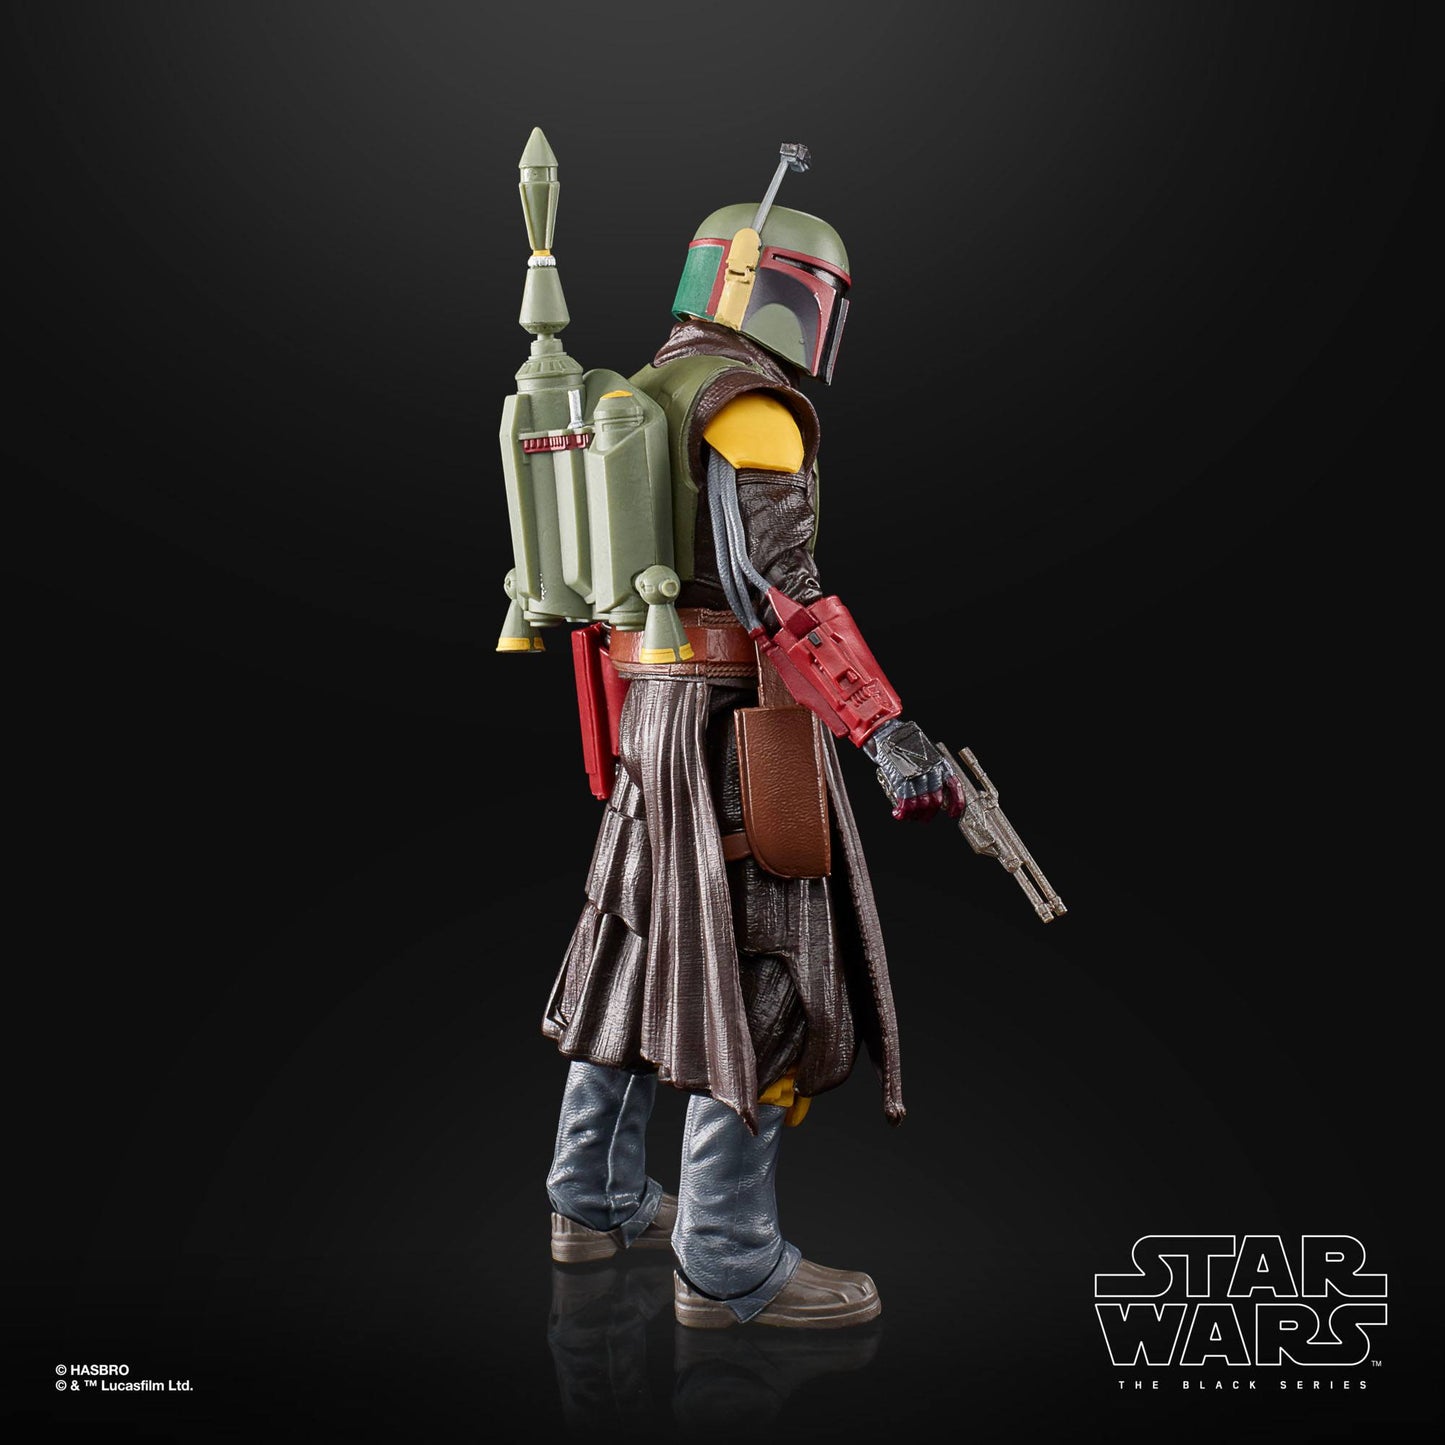 Star Wars: The Book of Boba Fett Black Series Deluxe Action Figure 202